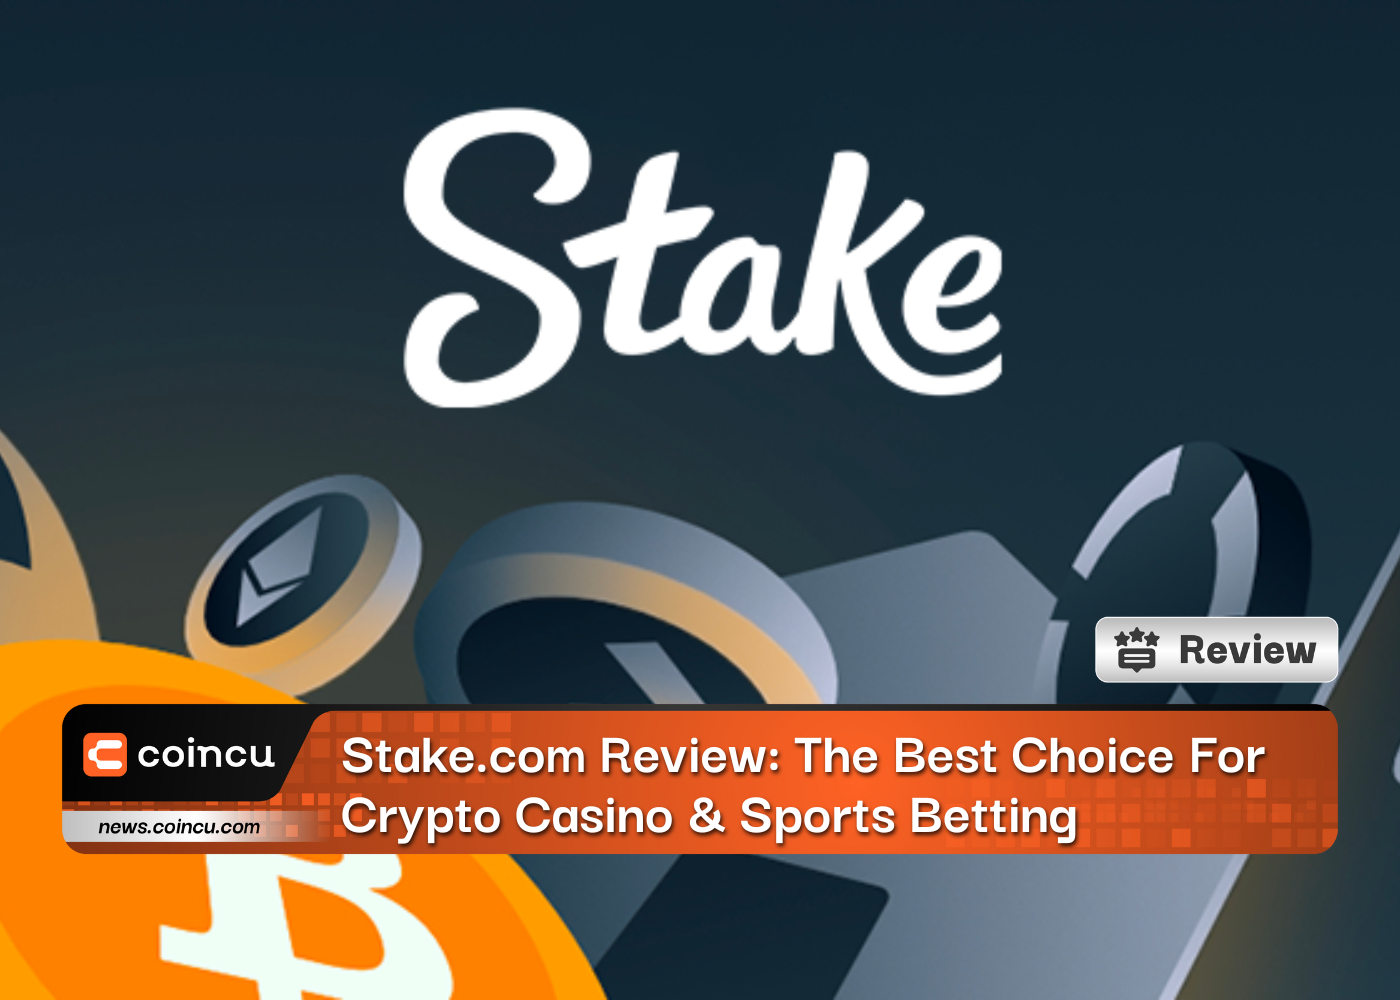 Stake.com Review: The Best Choice For Crypto Casino & Sports Betting